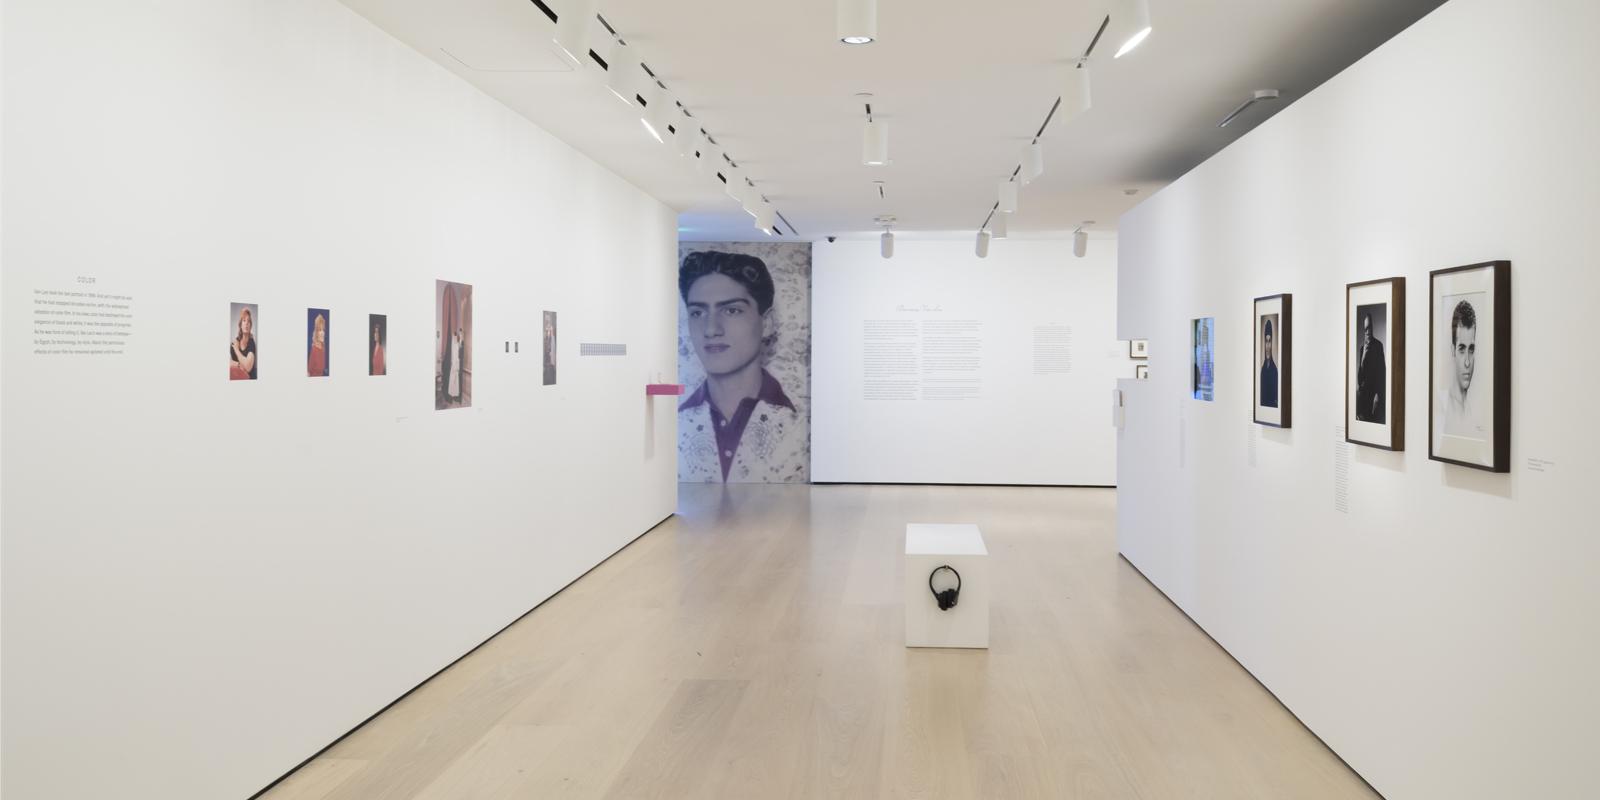 Inside of the Hammer Museum, displaying photographs taken by Van Leo on white walls